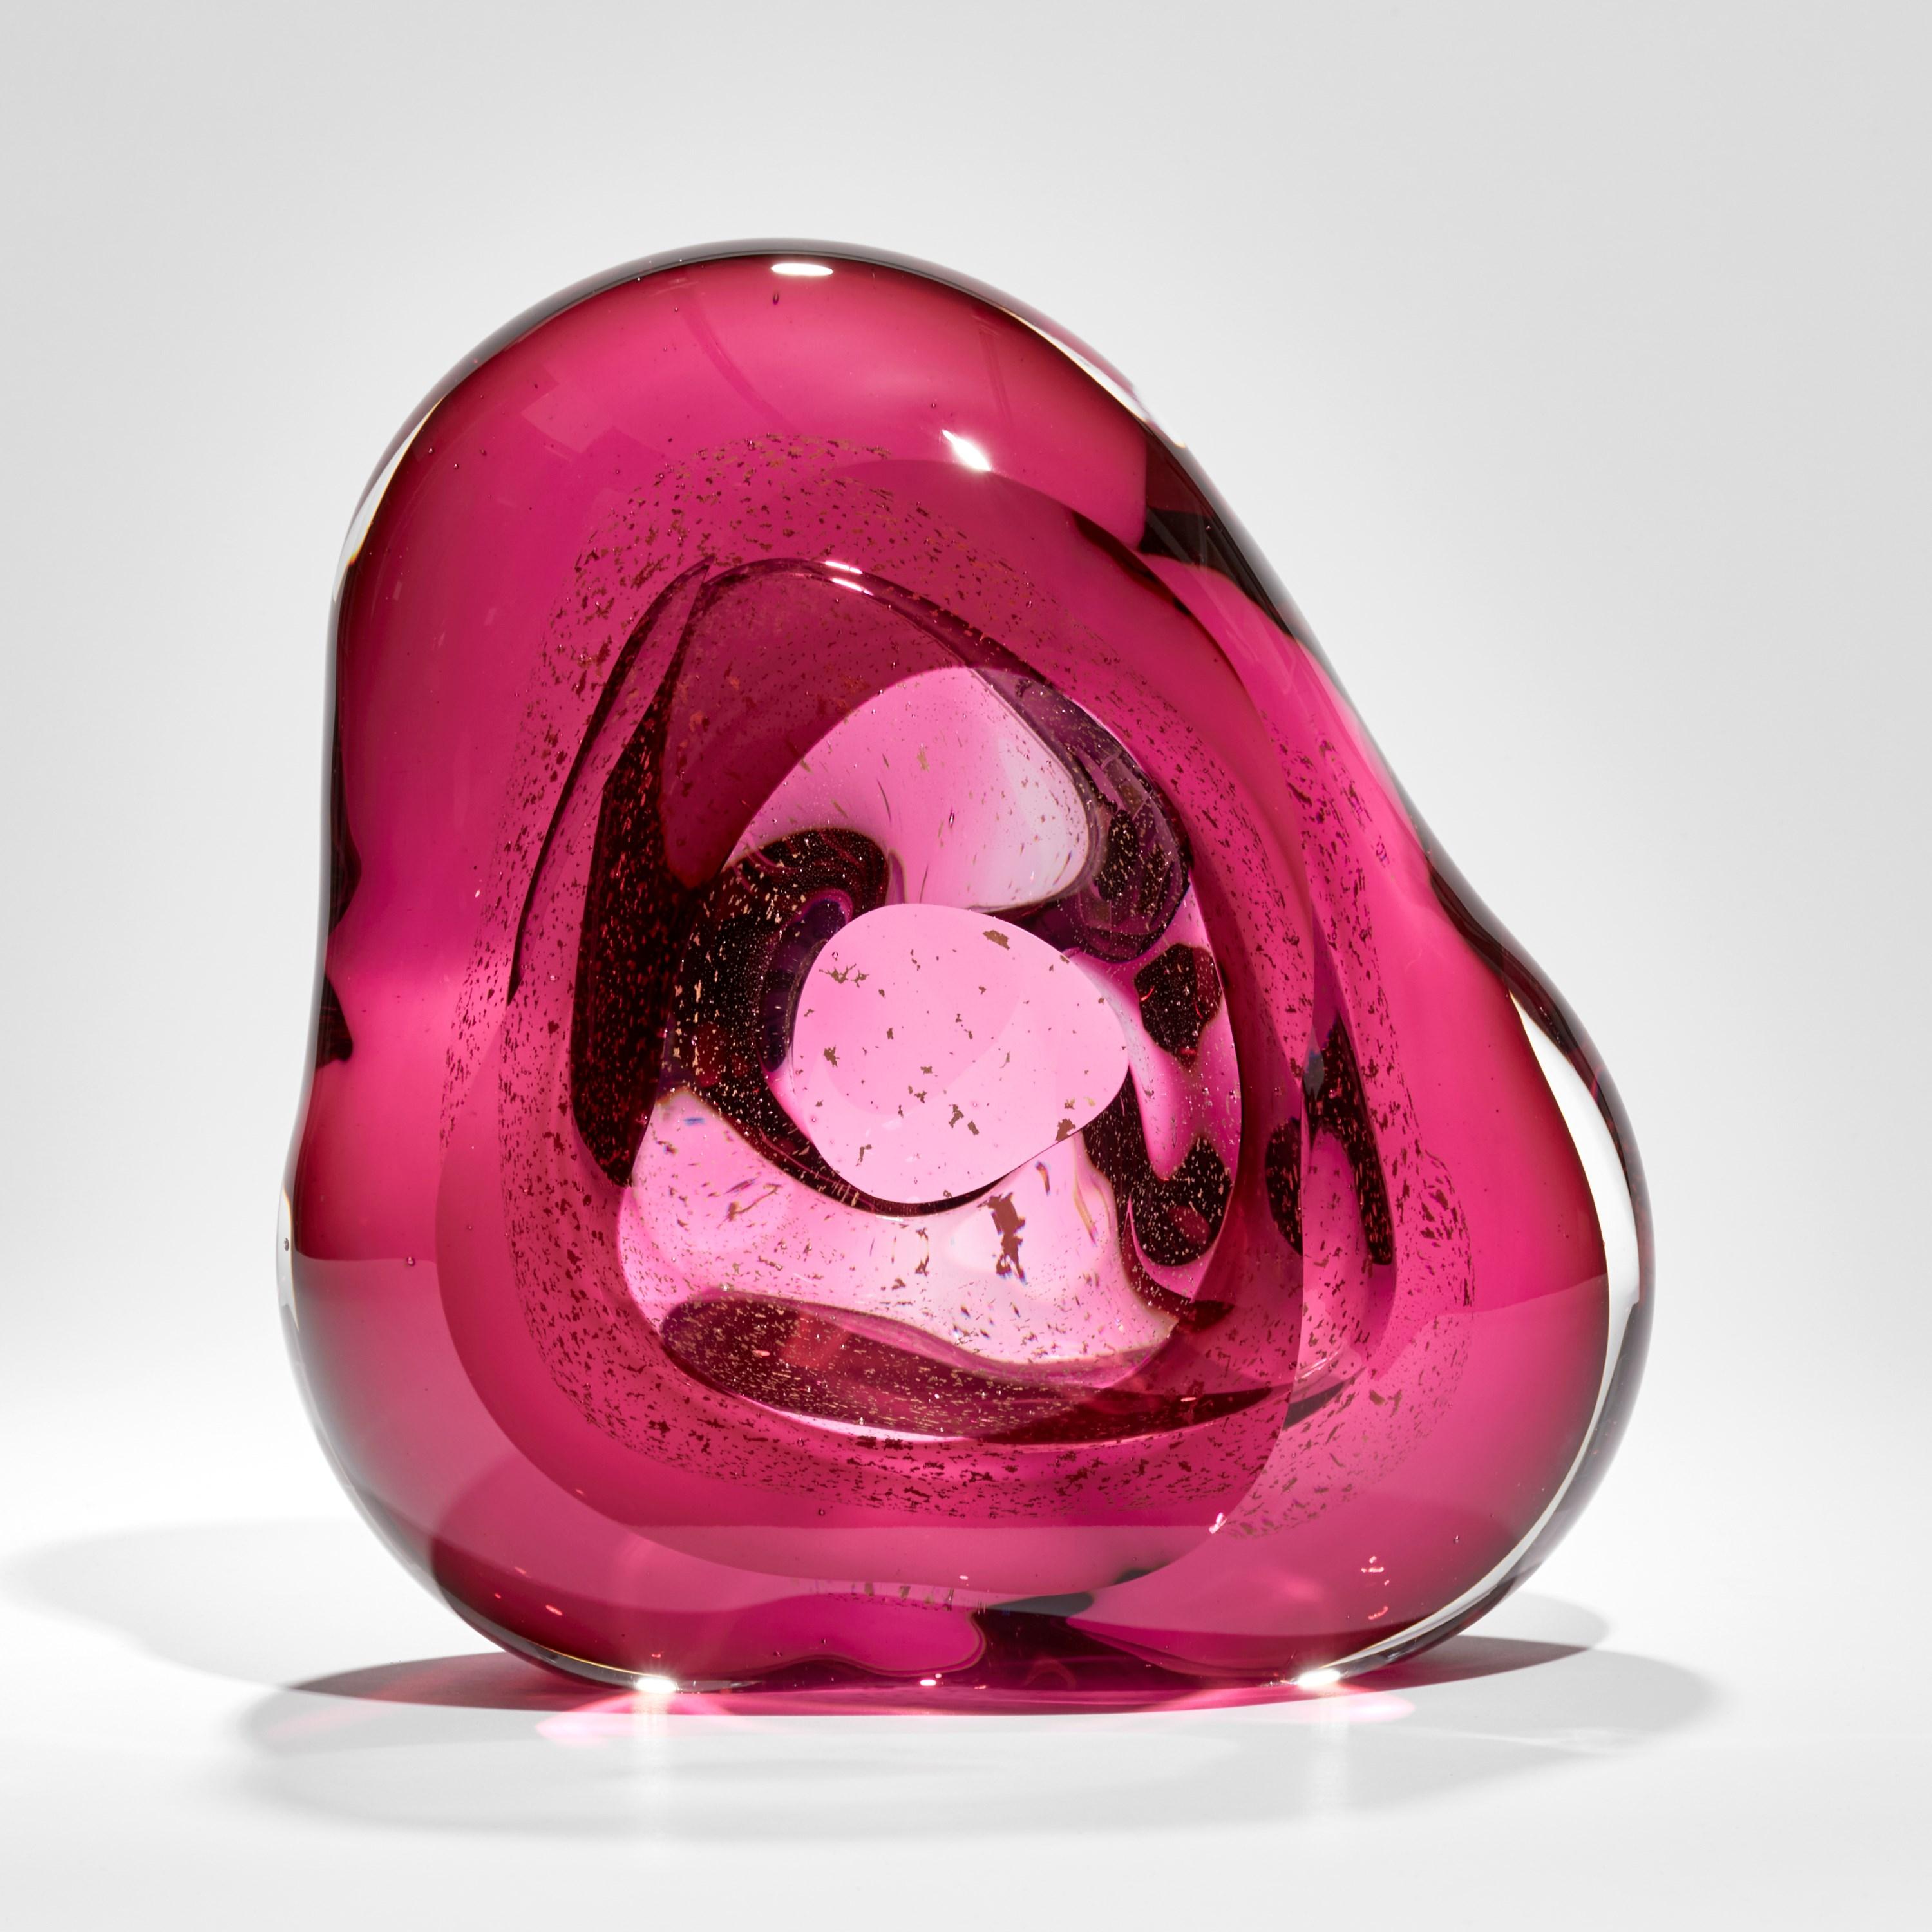 'Oro Vug in Fuchsia I' is a unique handblown pink glass sculpture by the British artist, Samantha Donaldson. Created from layers of clear and rich fuchsia pink coloured glass with 24 carat gold leaf, these elements merge creating the illusion of